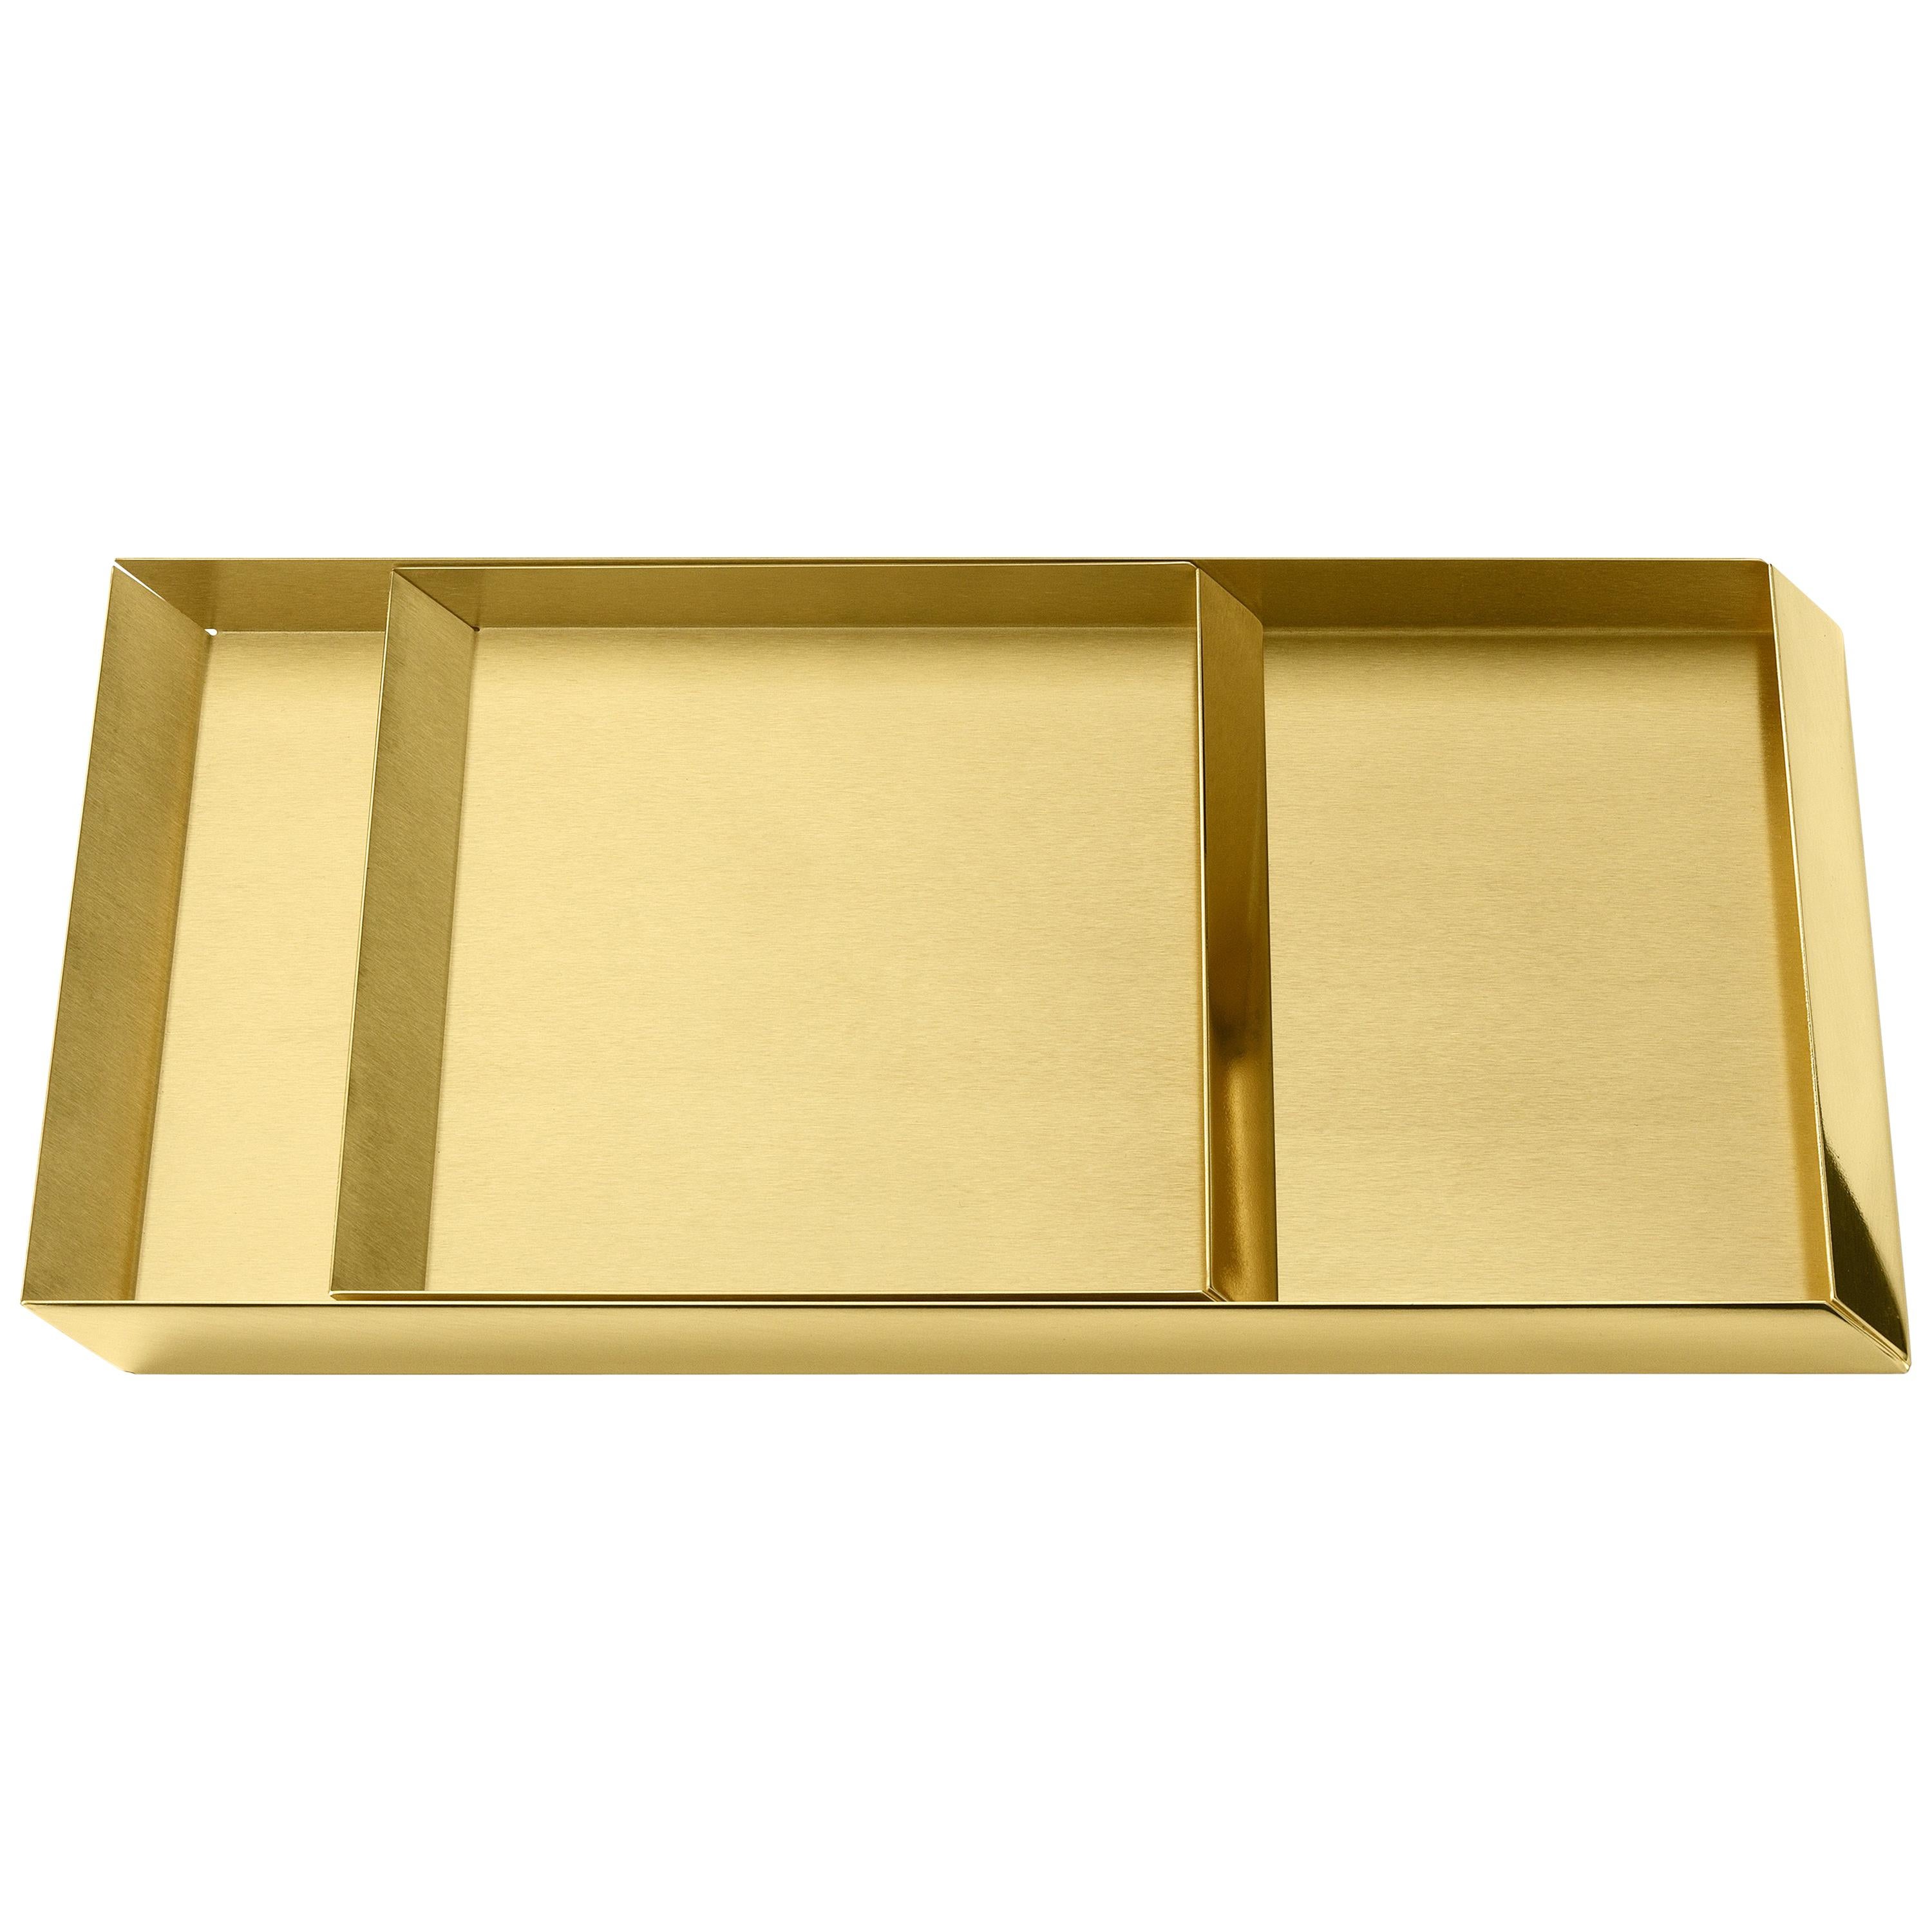 'Set of 2' Ghidini 1961 Axonometry Trays in Brass by Elisa Giovanni For Sale